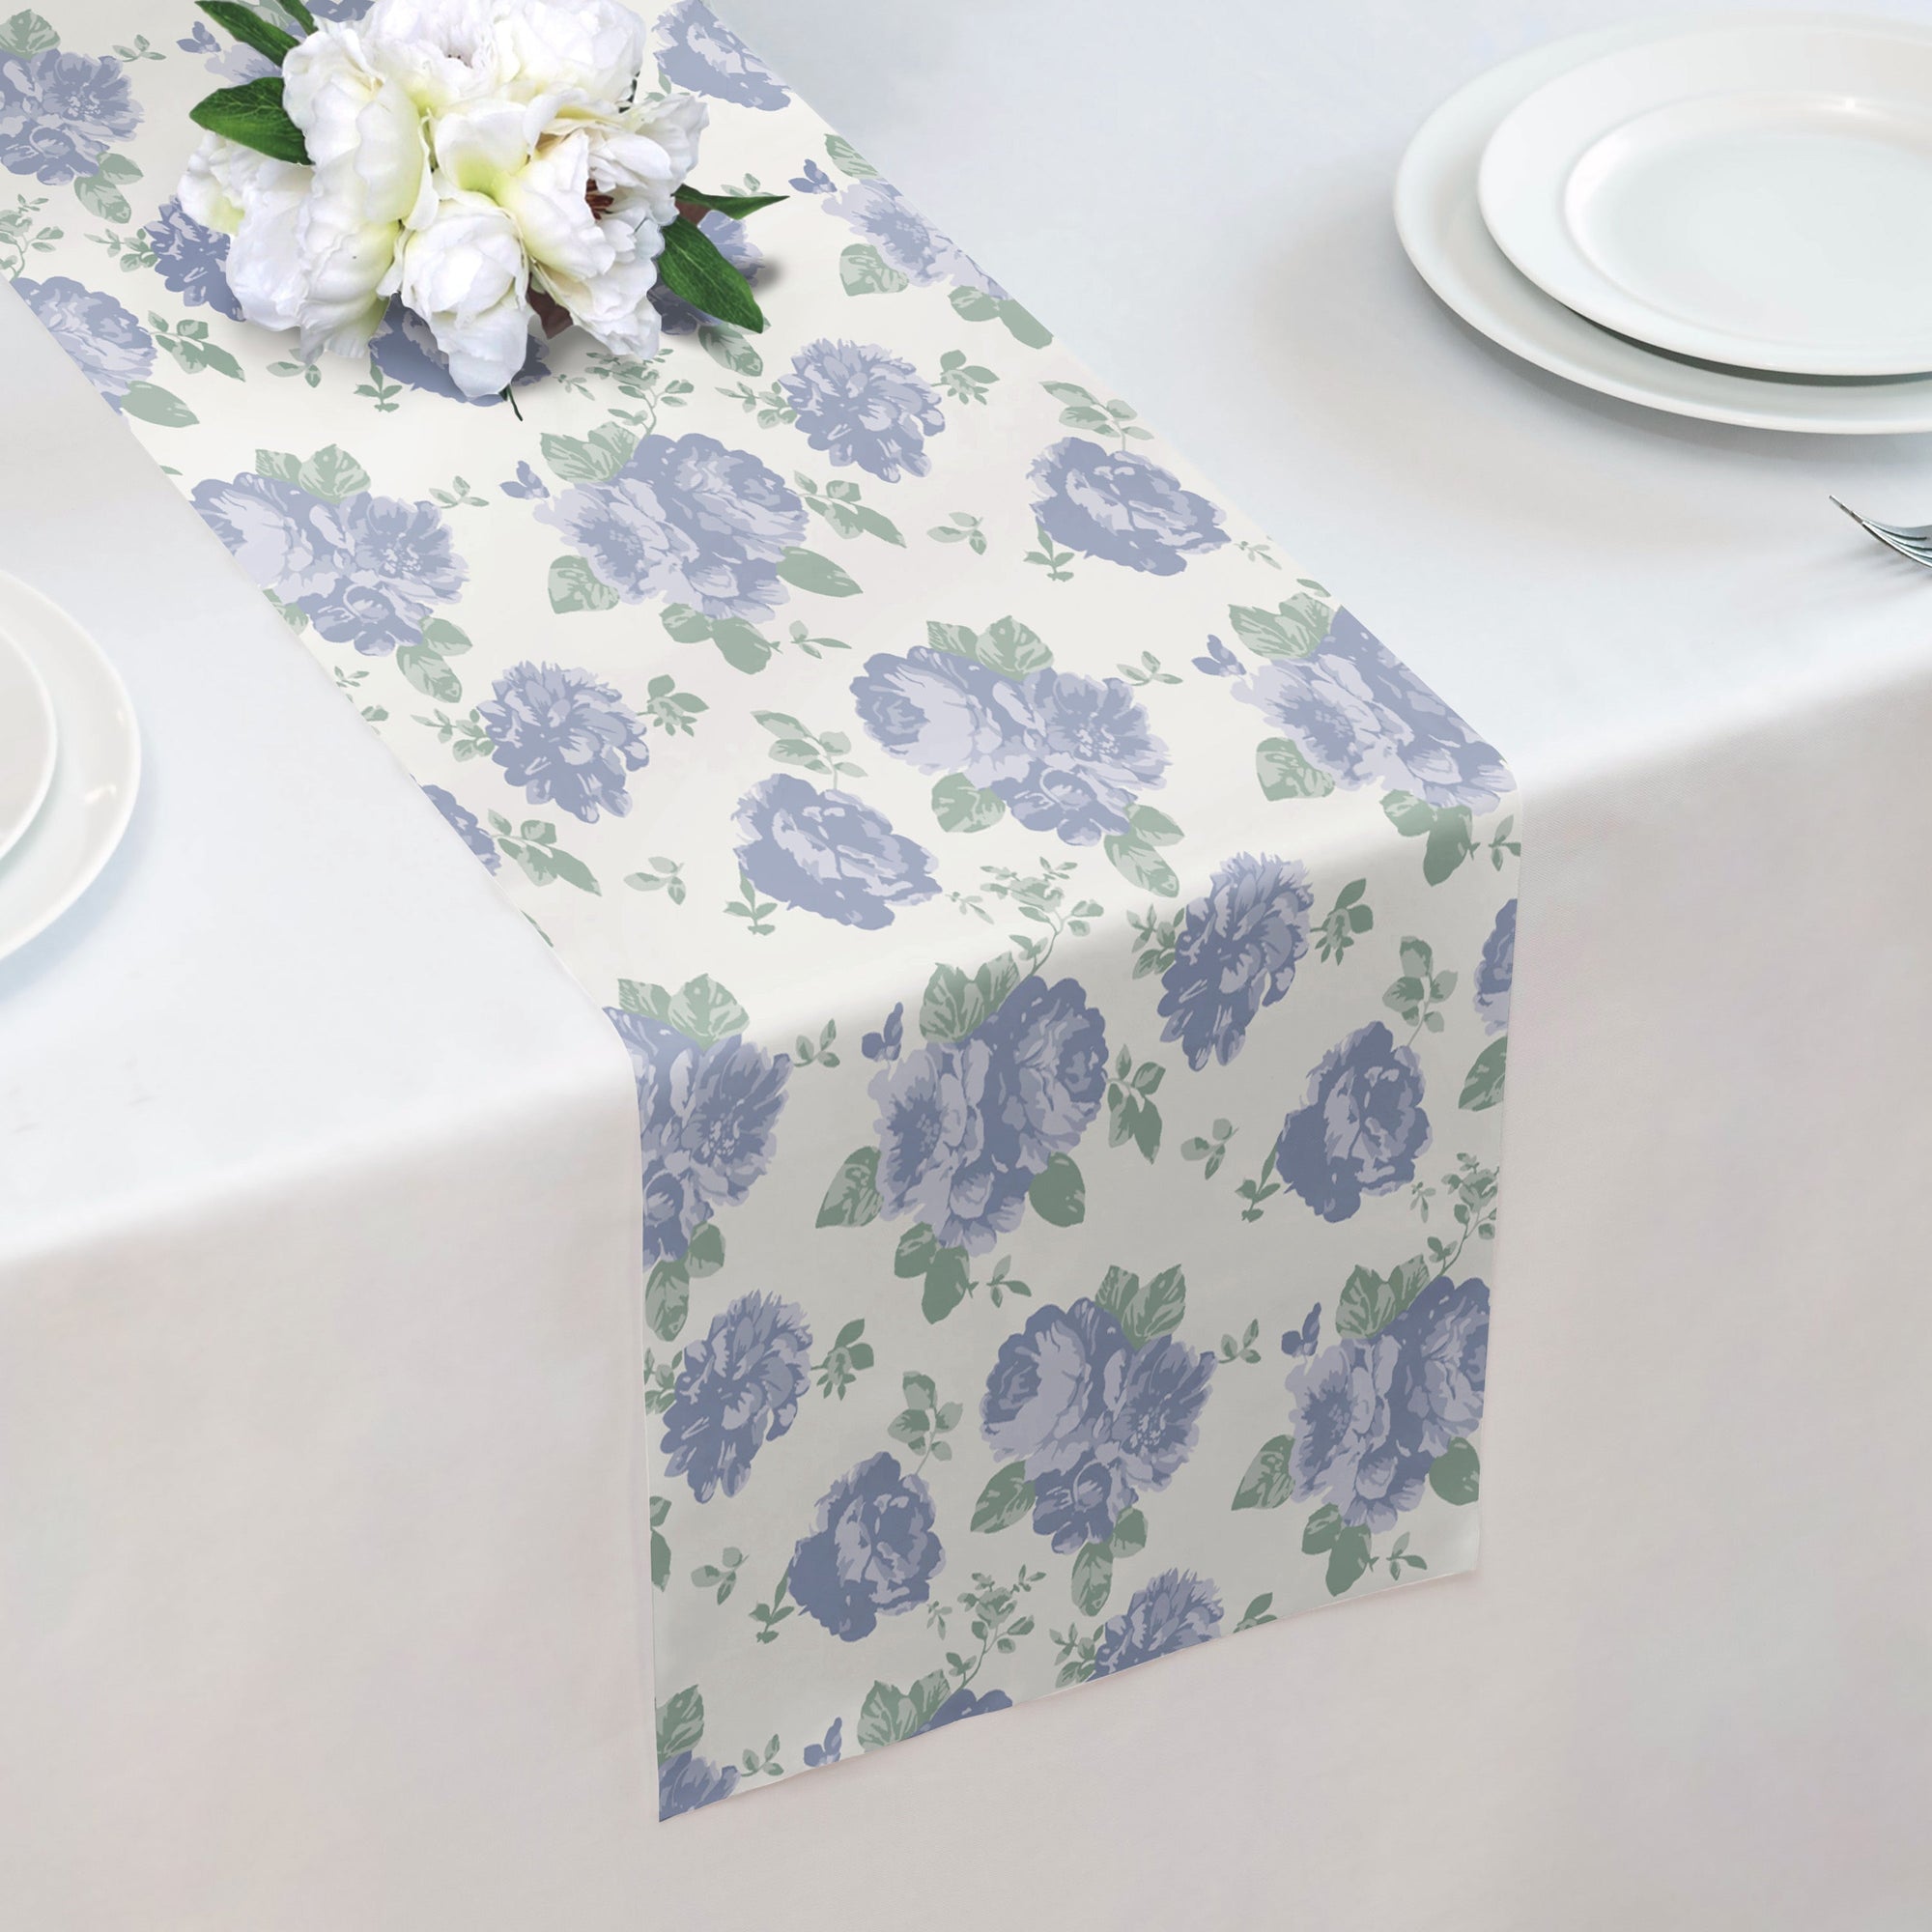 Sylvan Floral Table Runner - 12" x 72" -  - Knotty Tie Co.